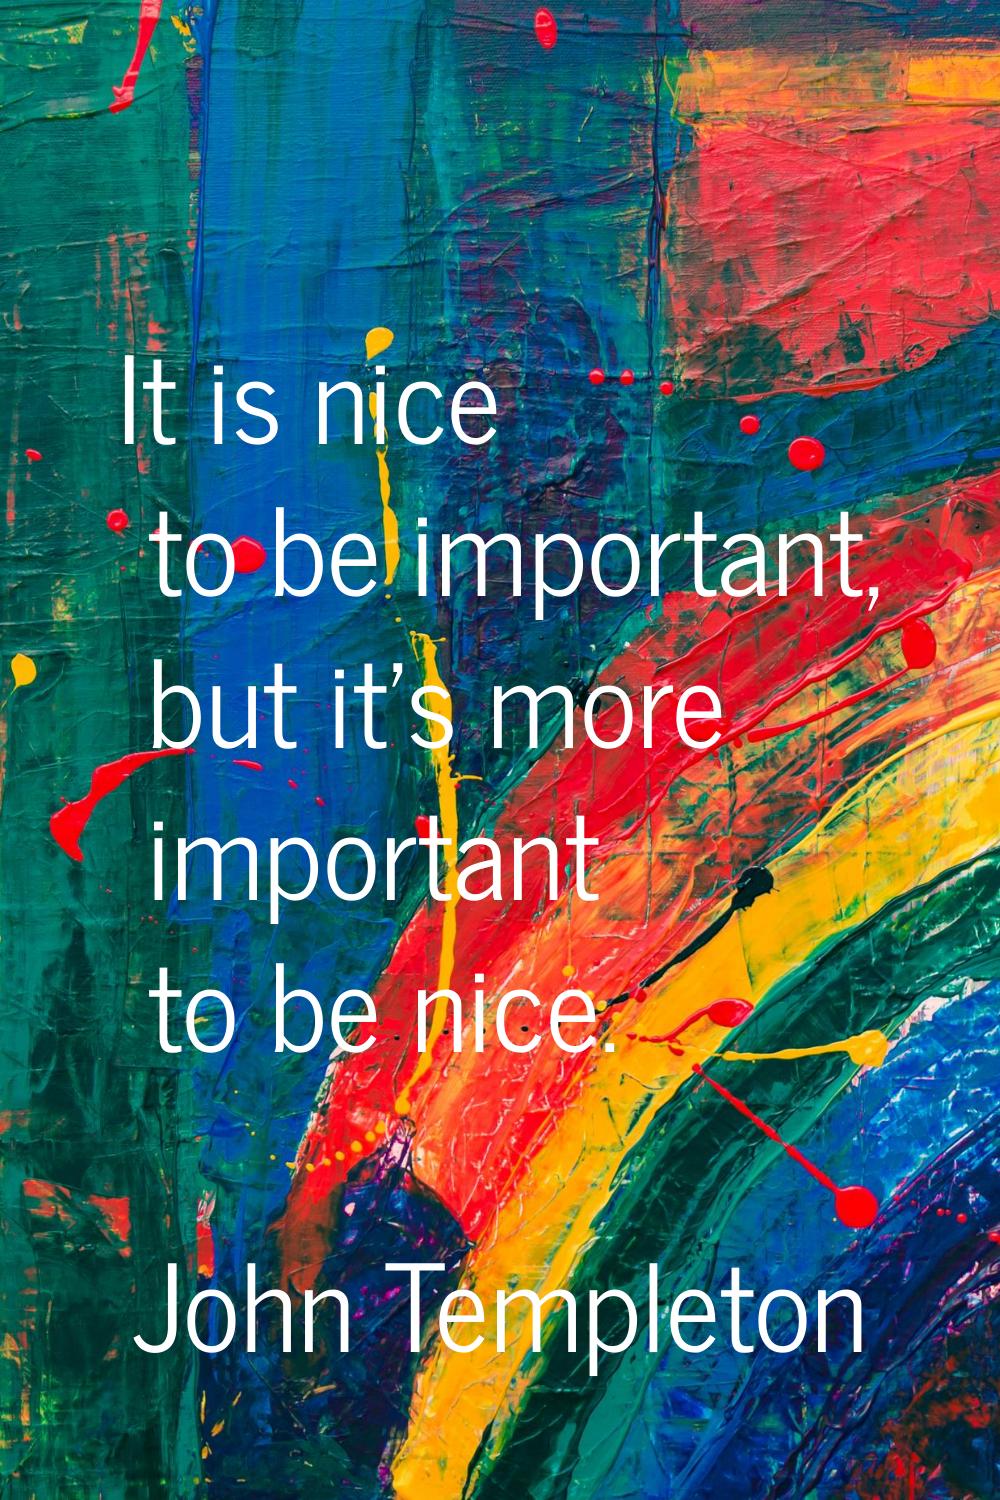 It is nice to be important, but it's more important to be nice.